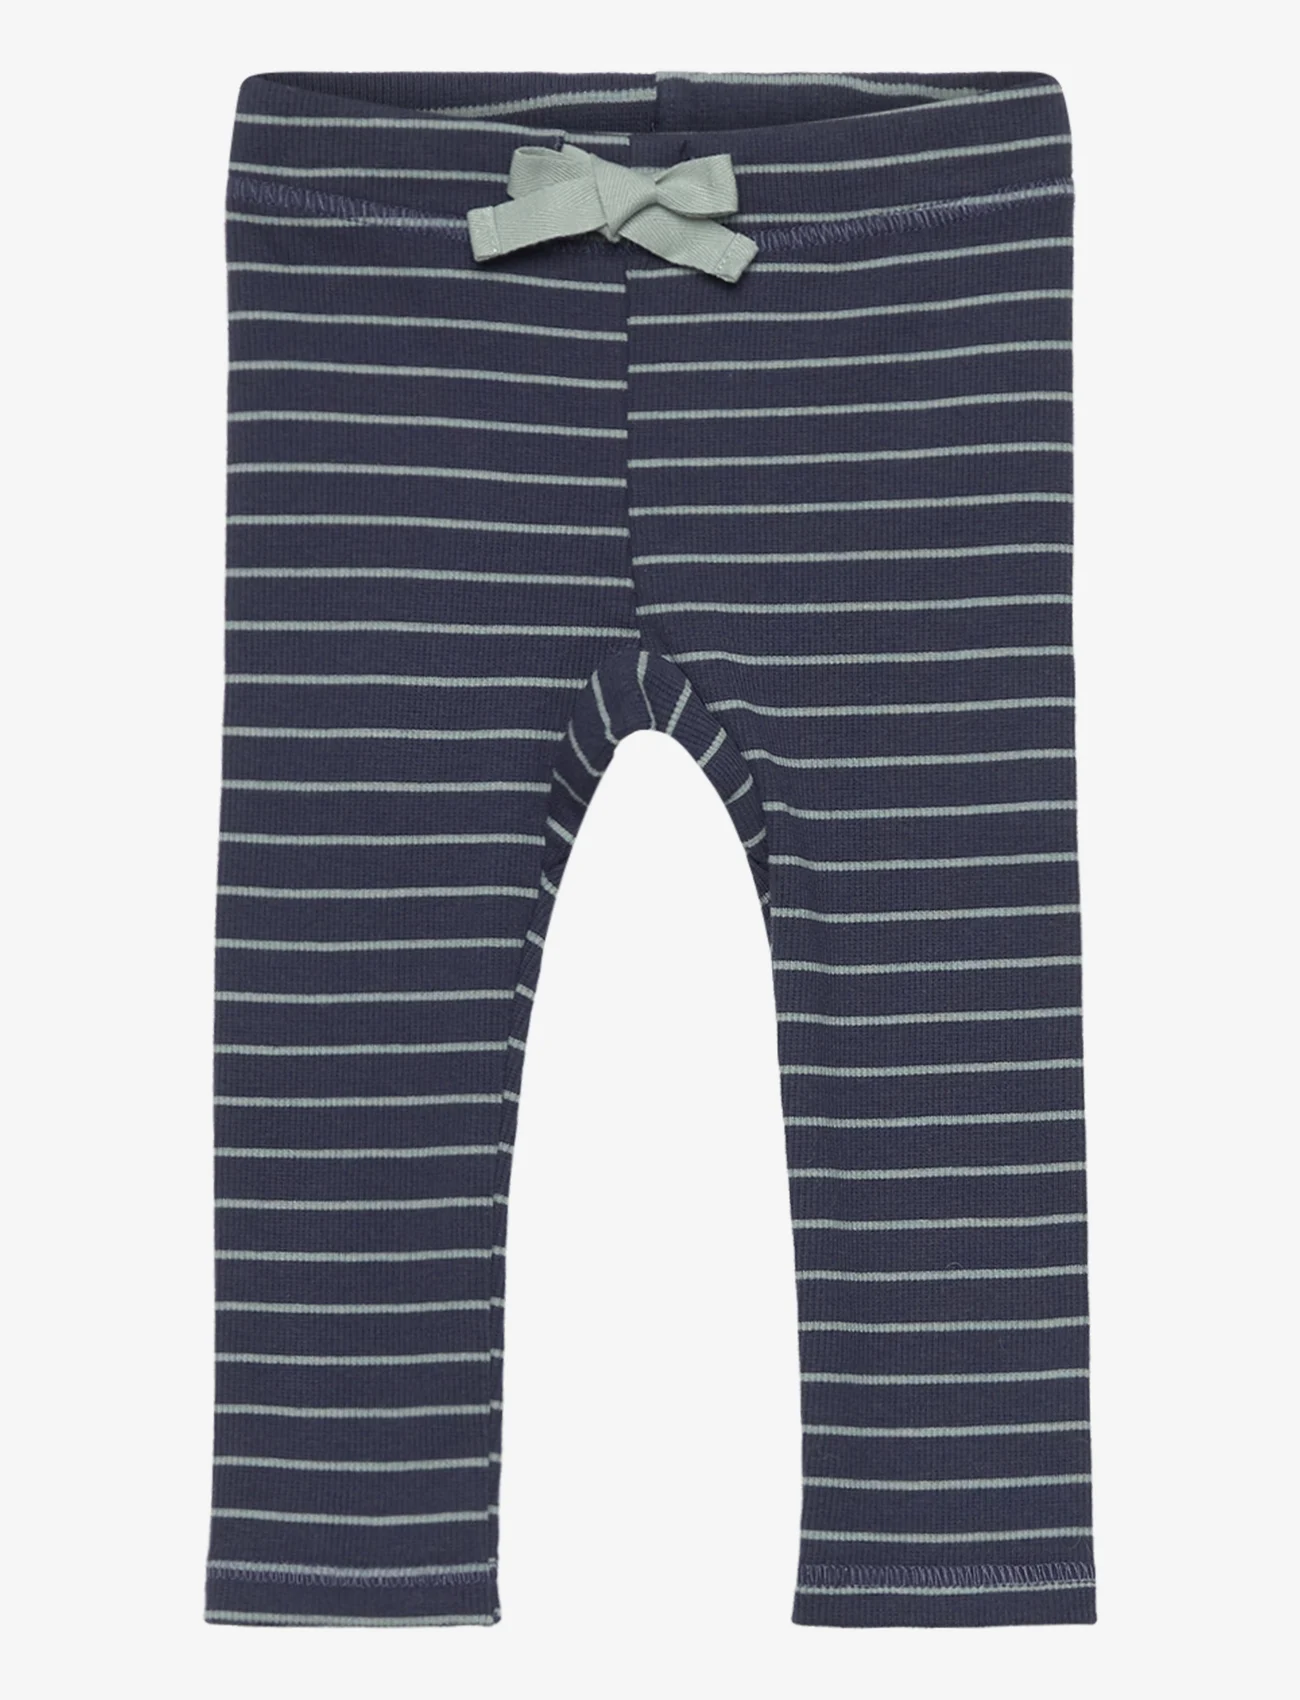 Müsli by Green Cotton - Stripe rib pants baby - lowest prices - night blue/ spa green - 0